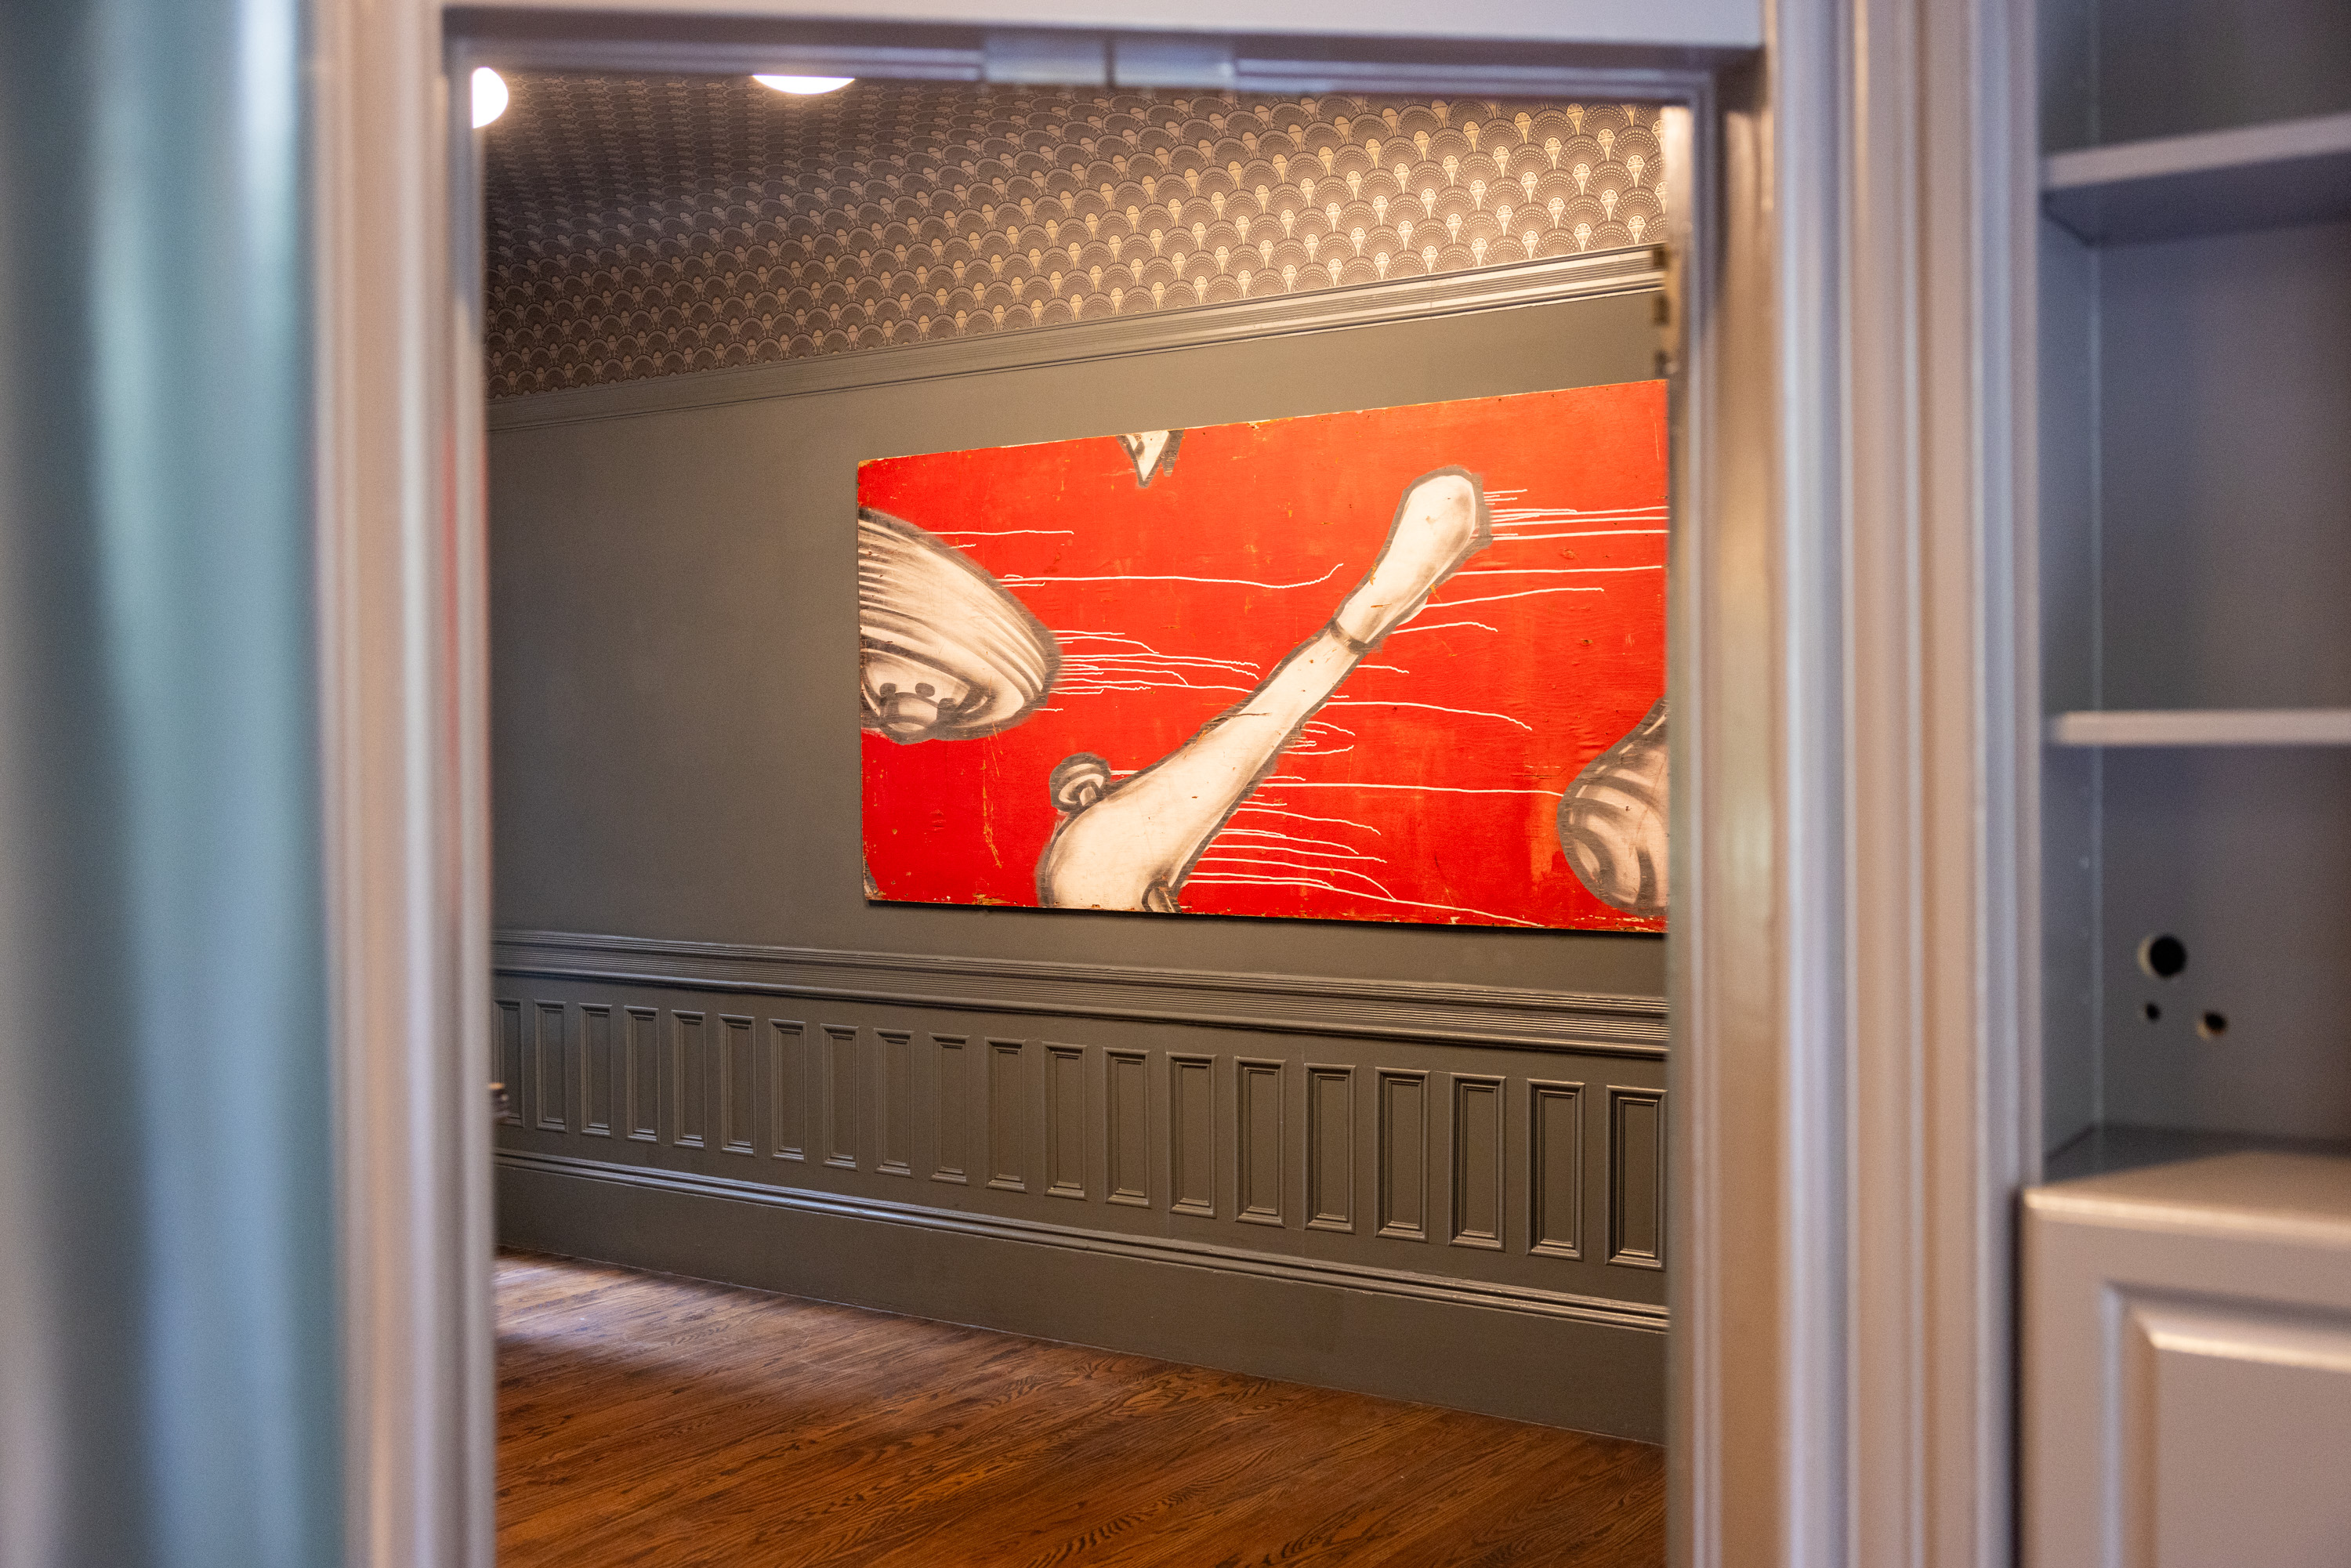 The image shows a room with grey wainscoted walls and wooden flooring, featuring a red abstract painting with white and black shapes, visible through a doorway.